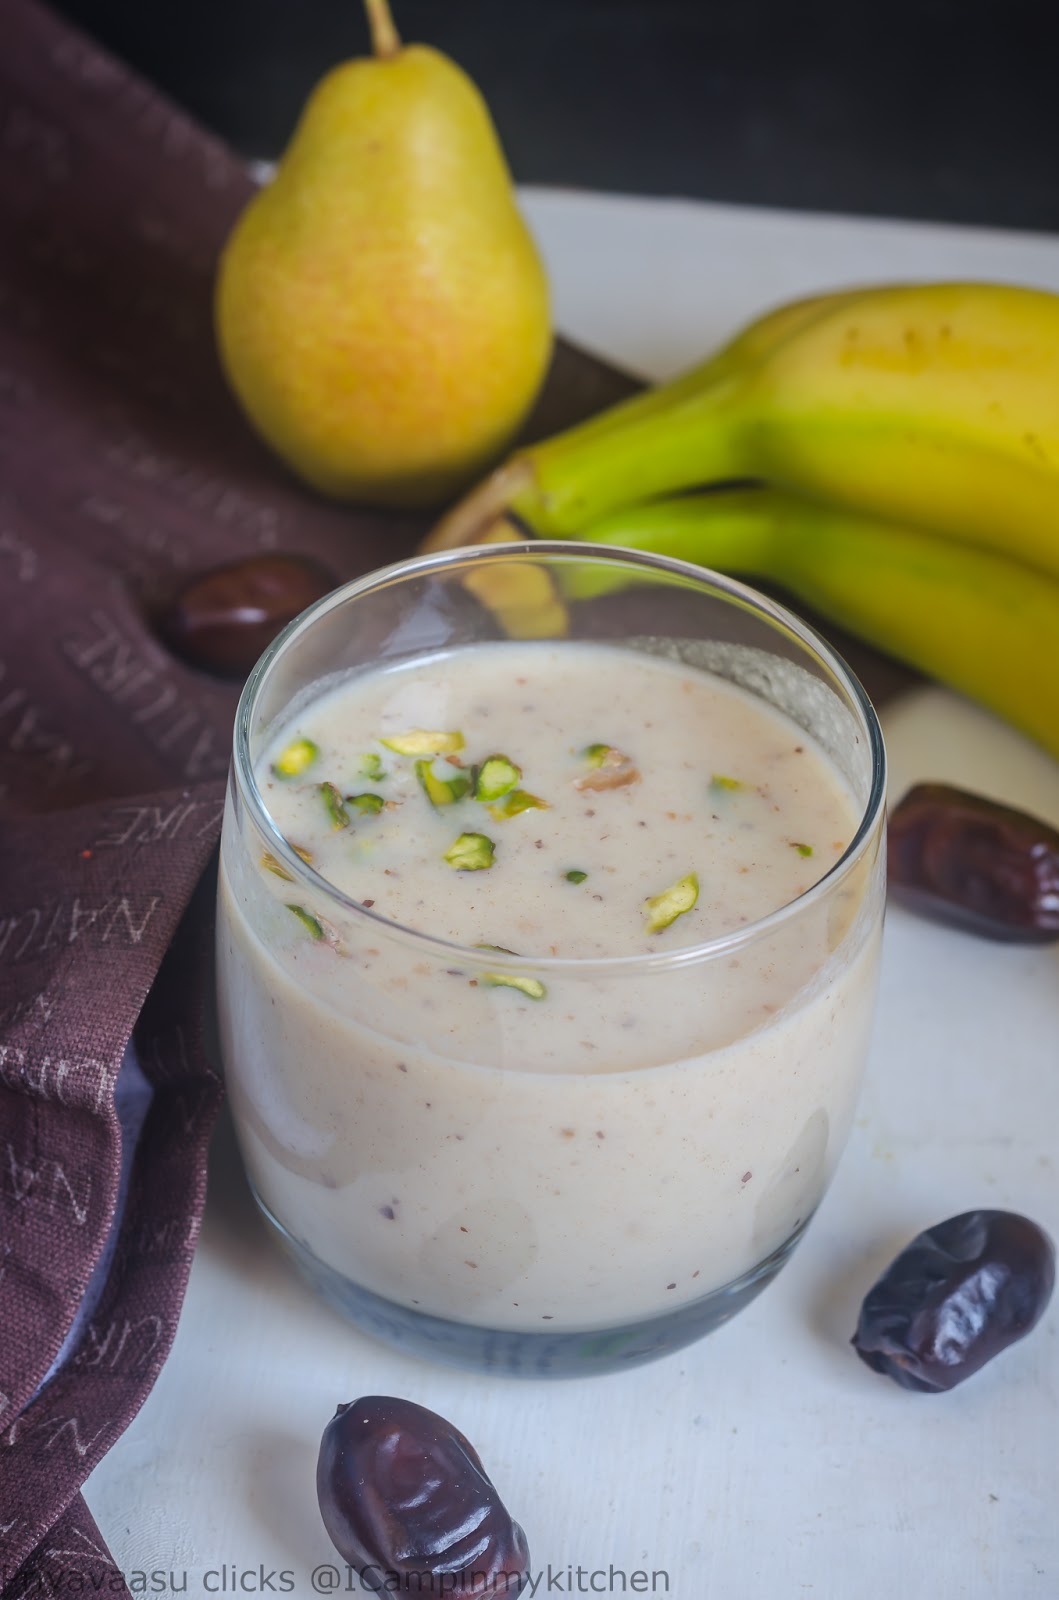 Smoothie with fresh banana and pears